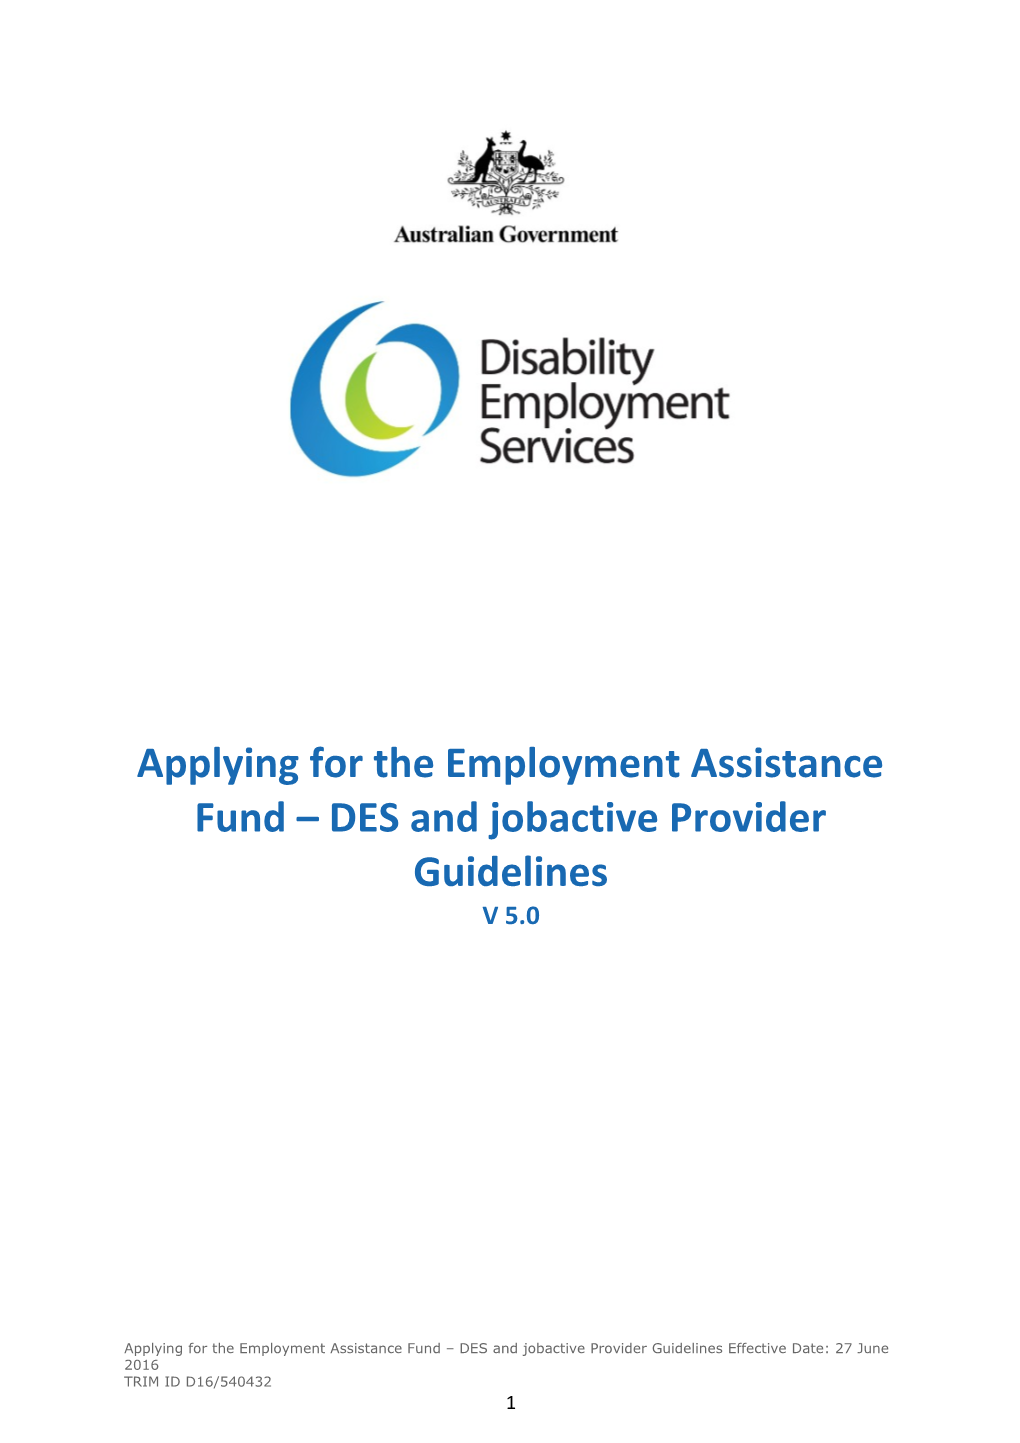 Applying for the Employment Assistance Fund DES and Jobactive Provider Guidelines